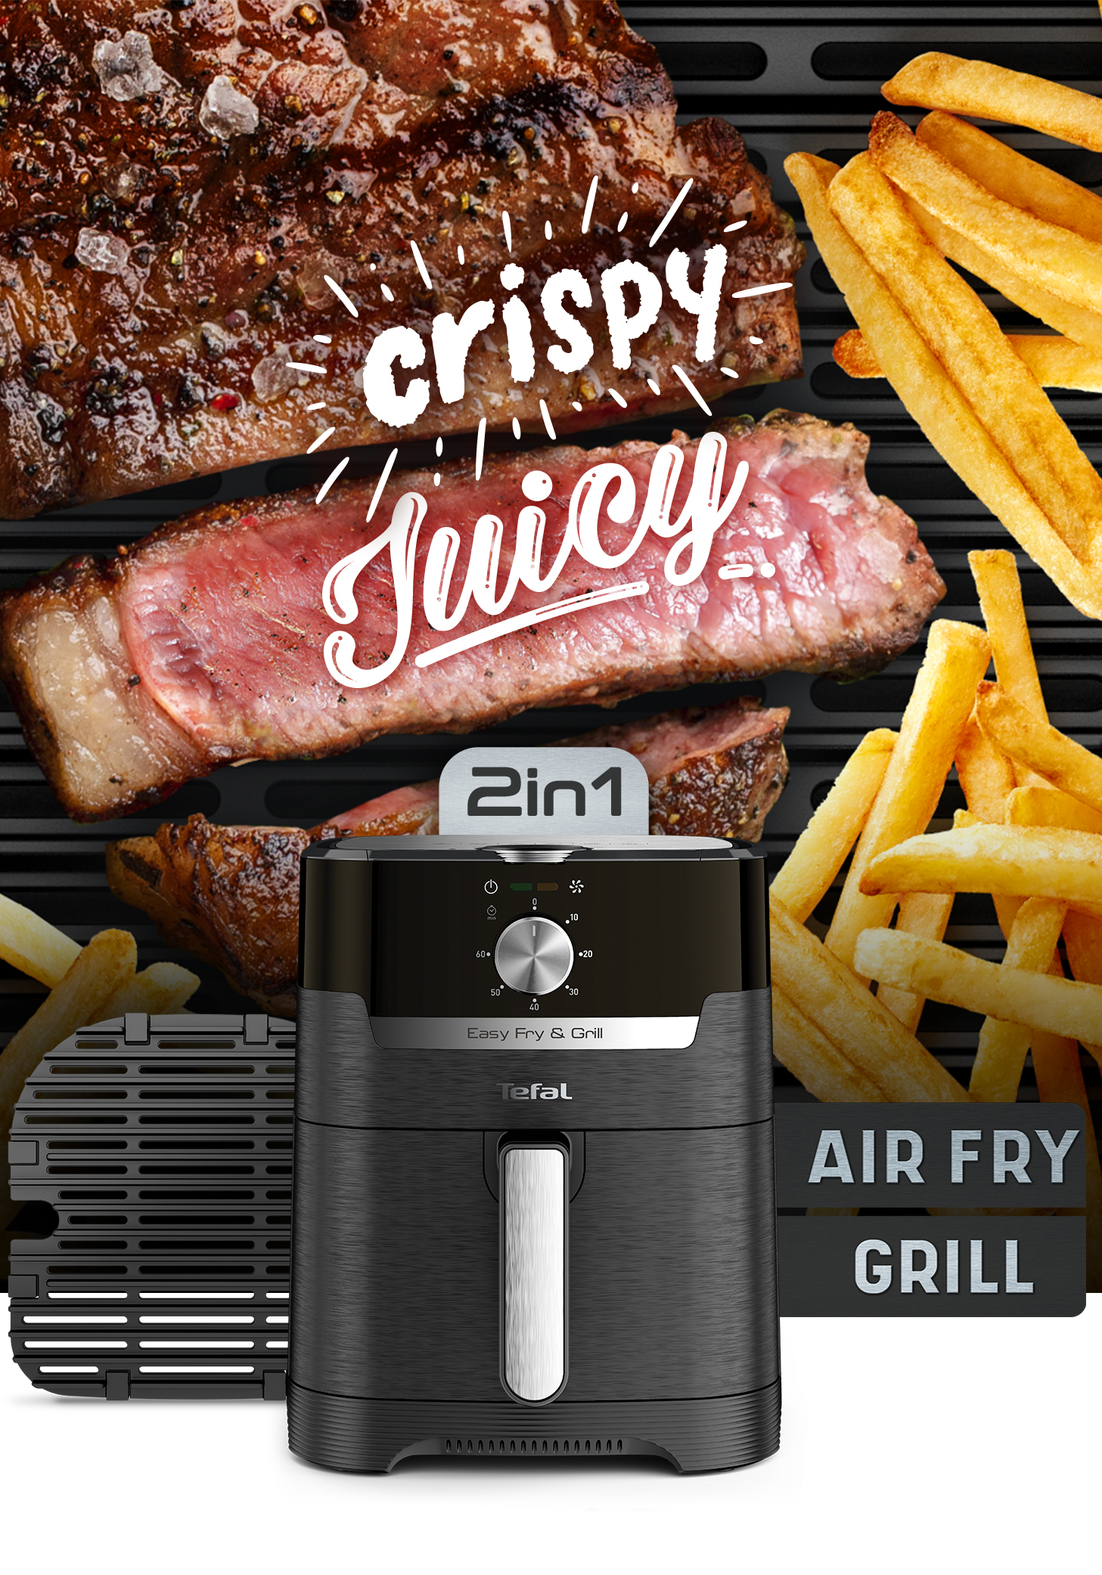 Friteza/gril Easy Fry and Grill Classic 1500W 4.2l crna Tefal